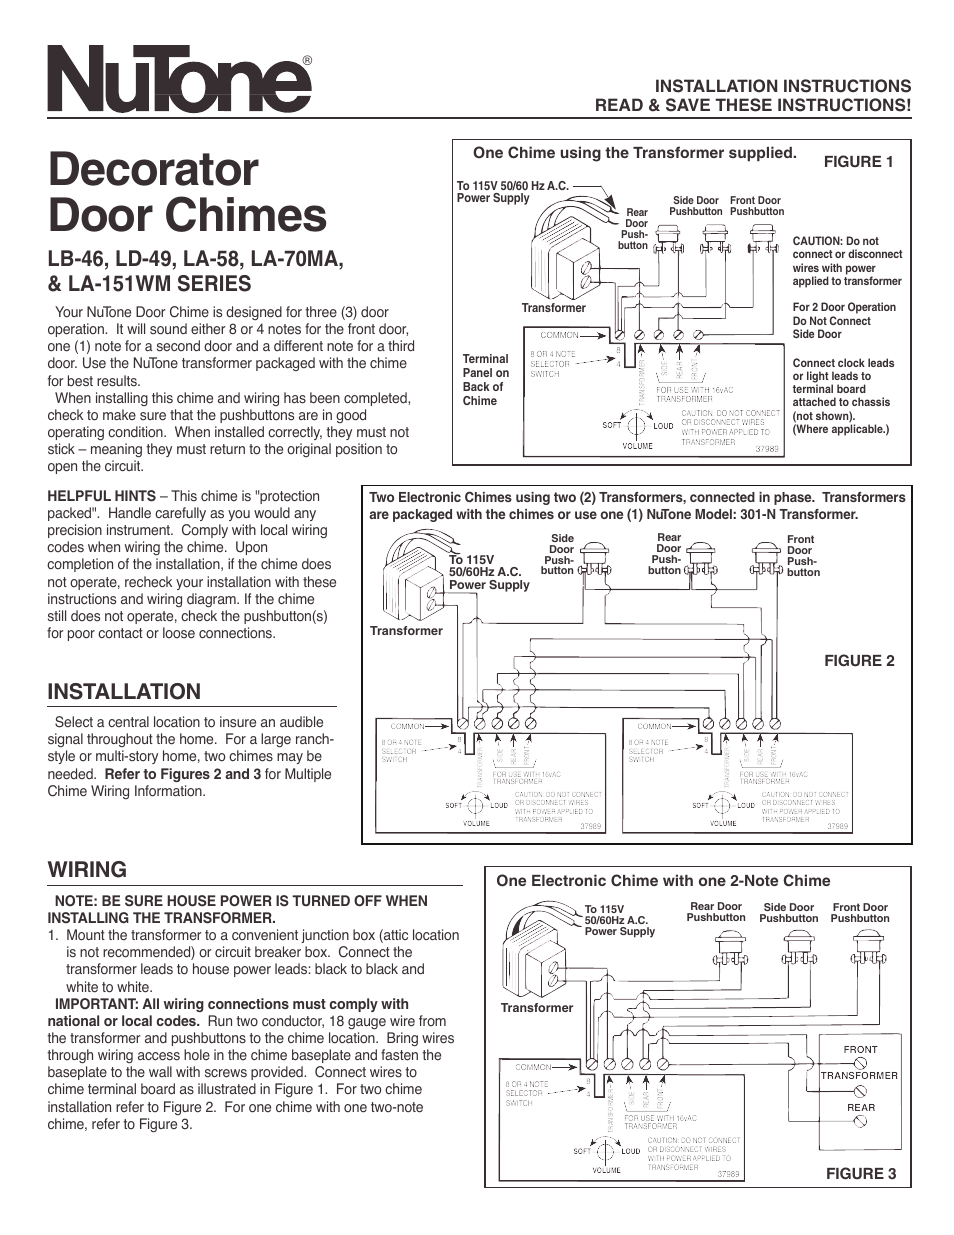 NuTone DECORATOR DOOR CHIMES LA-58 User Manual | 2 pages | Also for